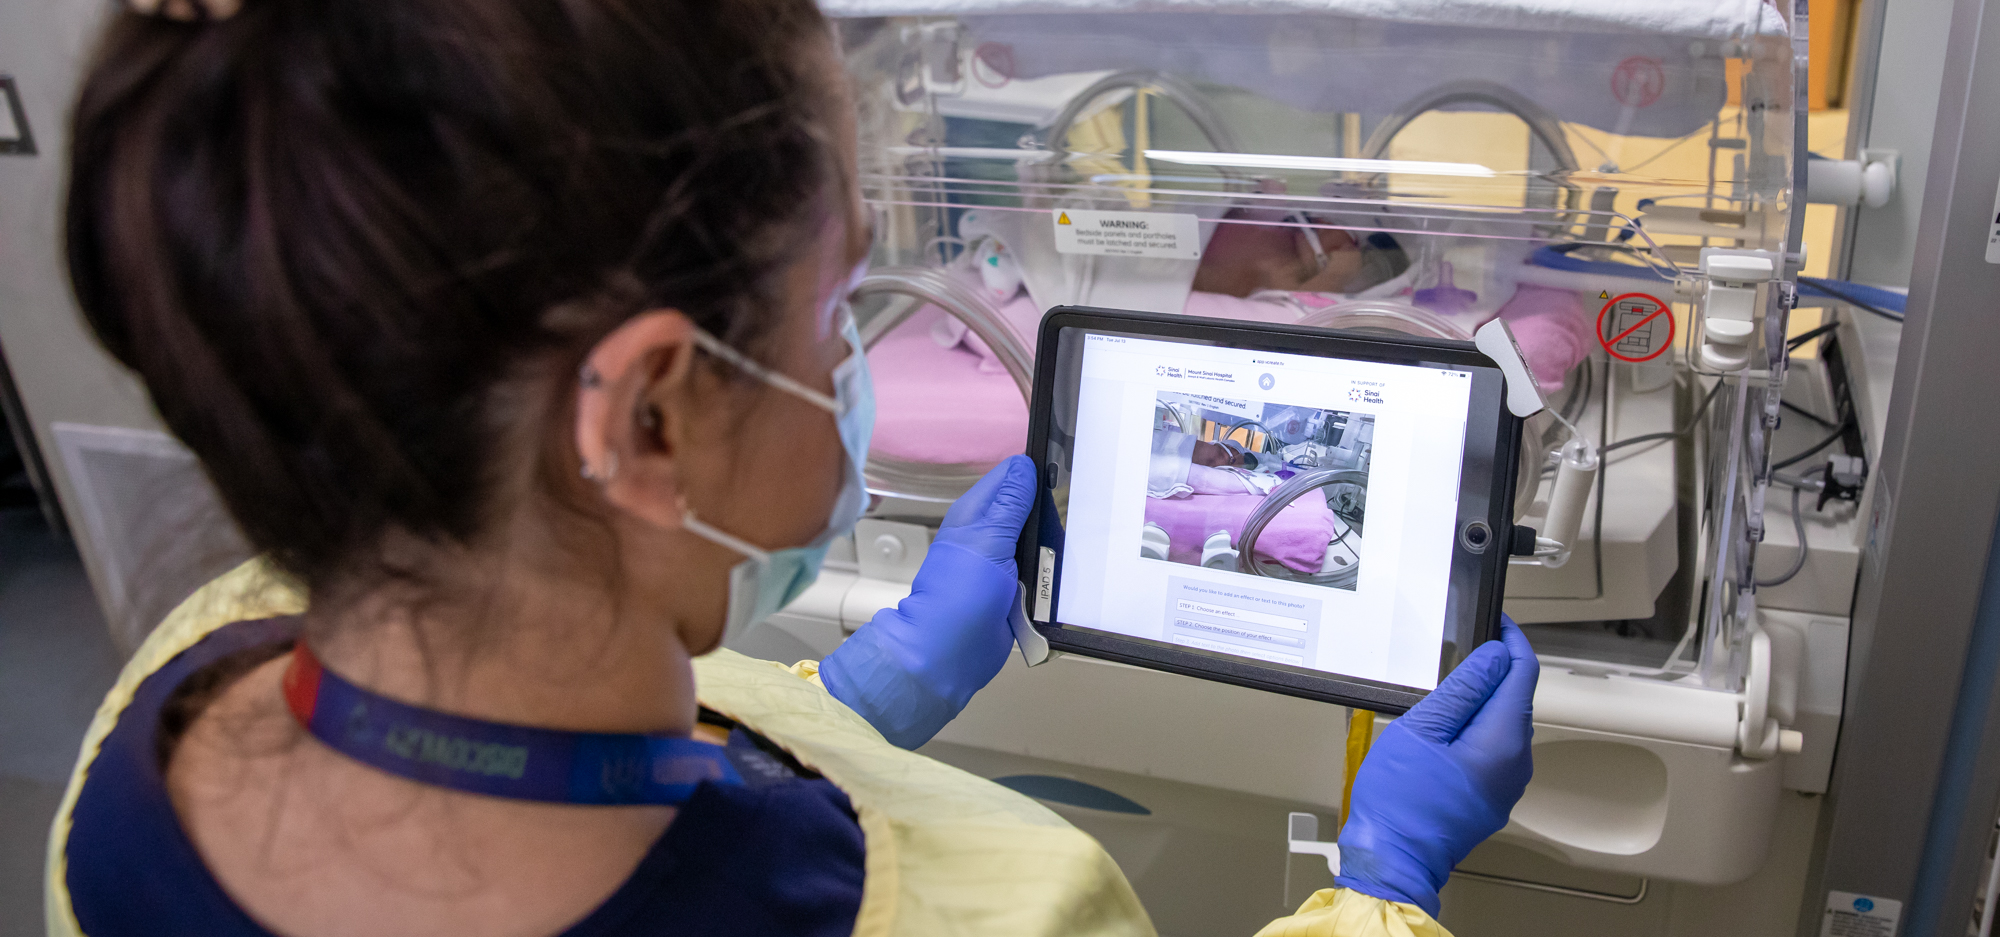 Families with premature babies at Mount Sinai stay connected with new video sharing app